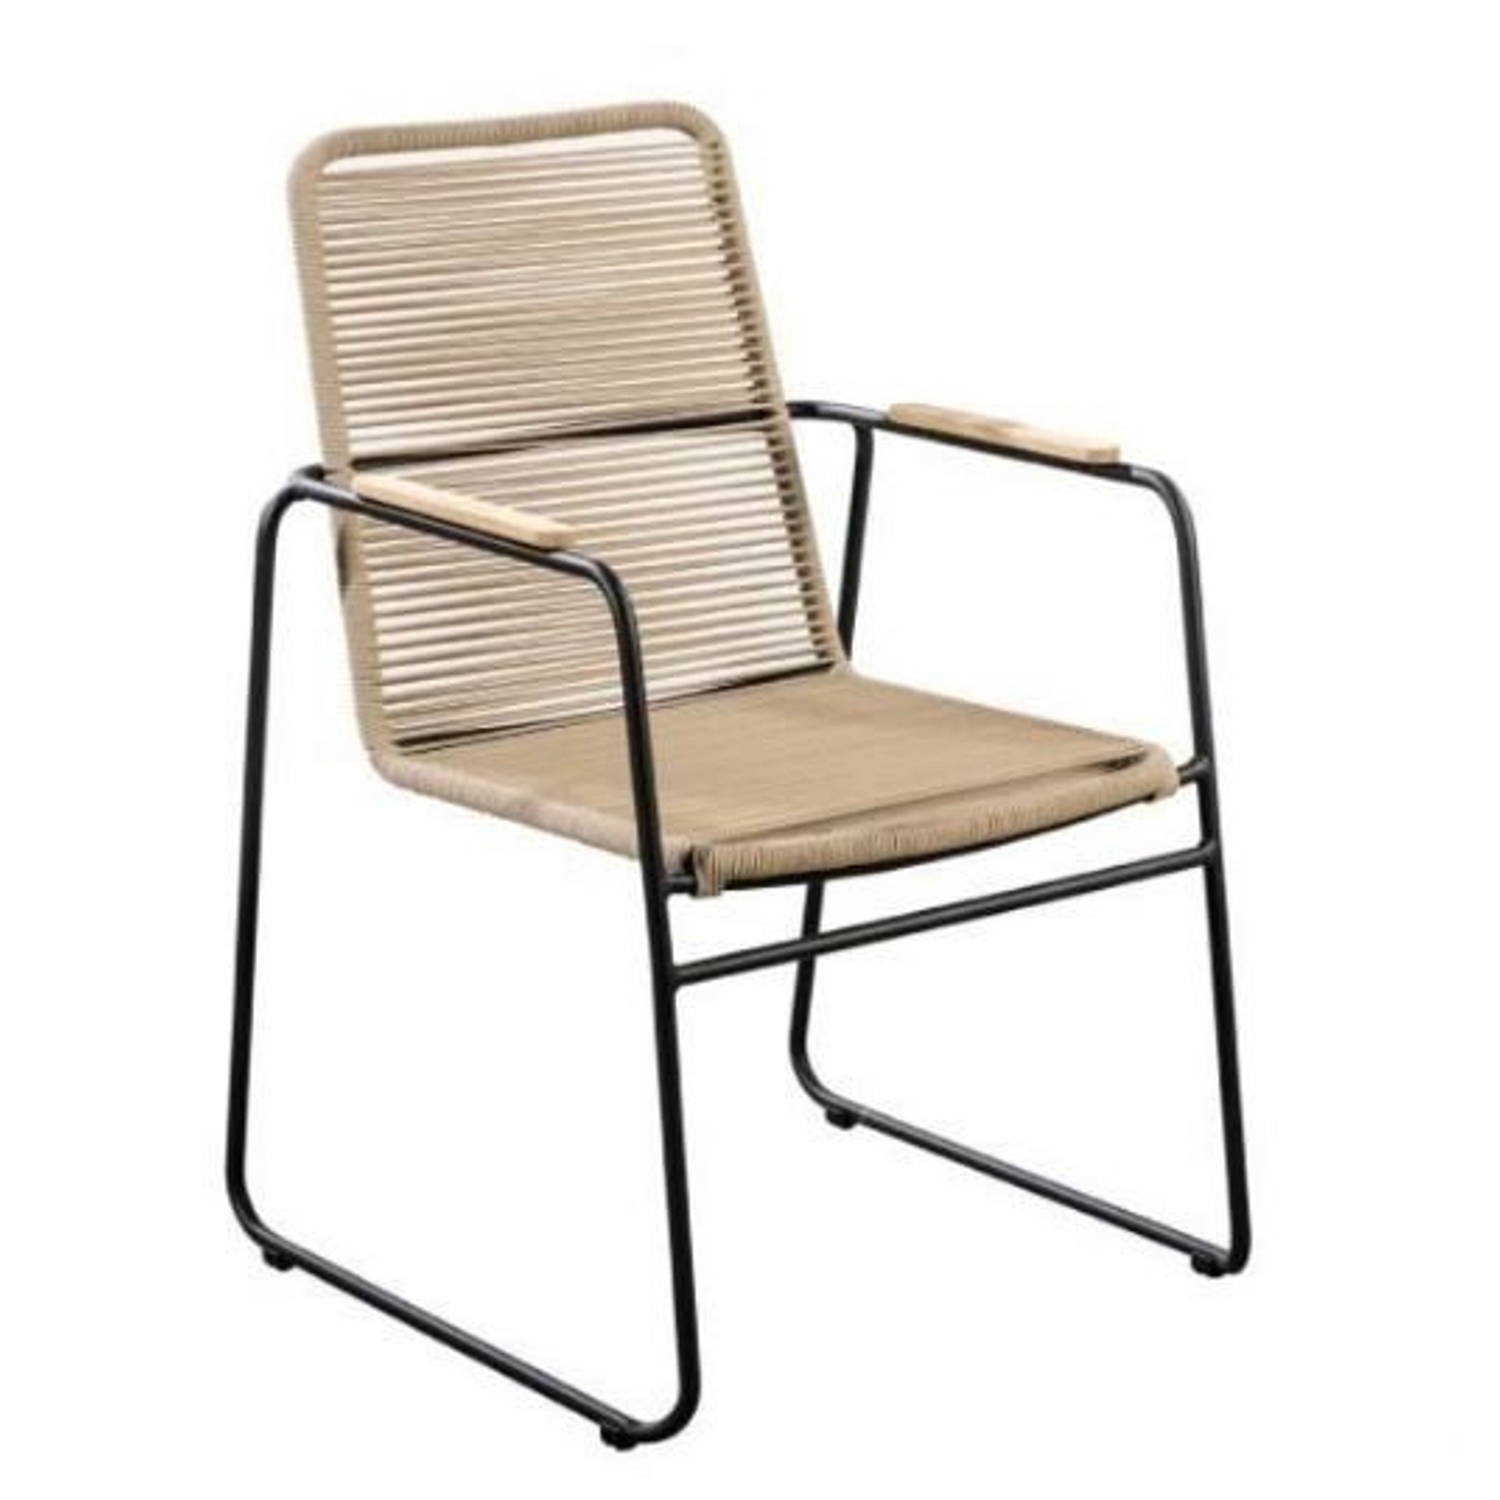 Yoi - Wasabi stackable dining chair alu black/rope natural